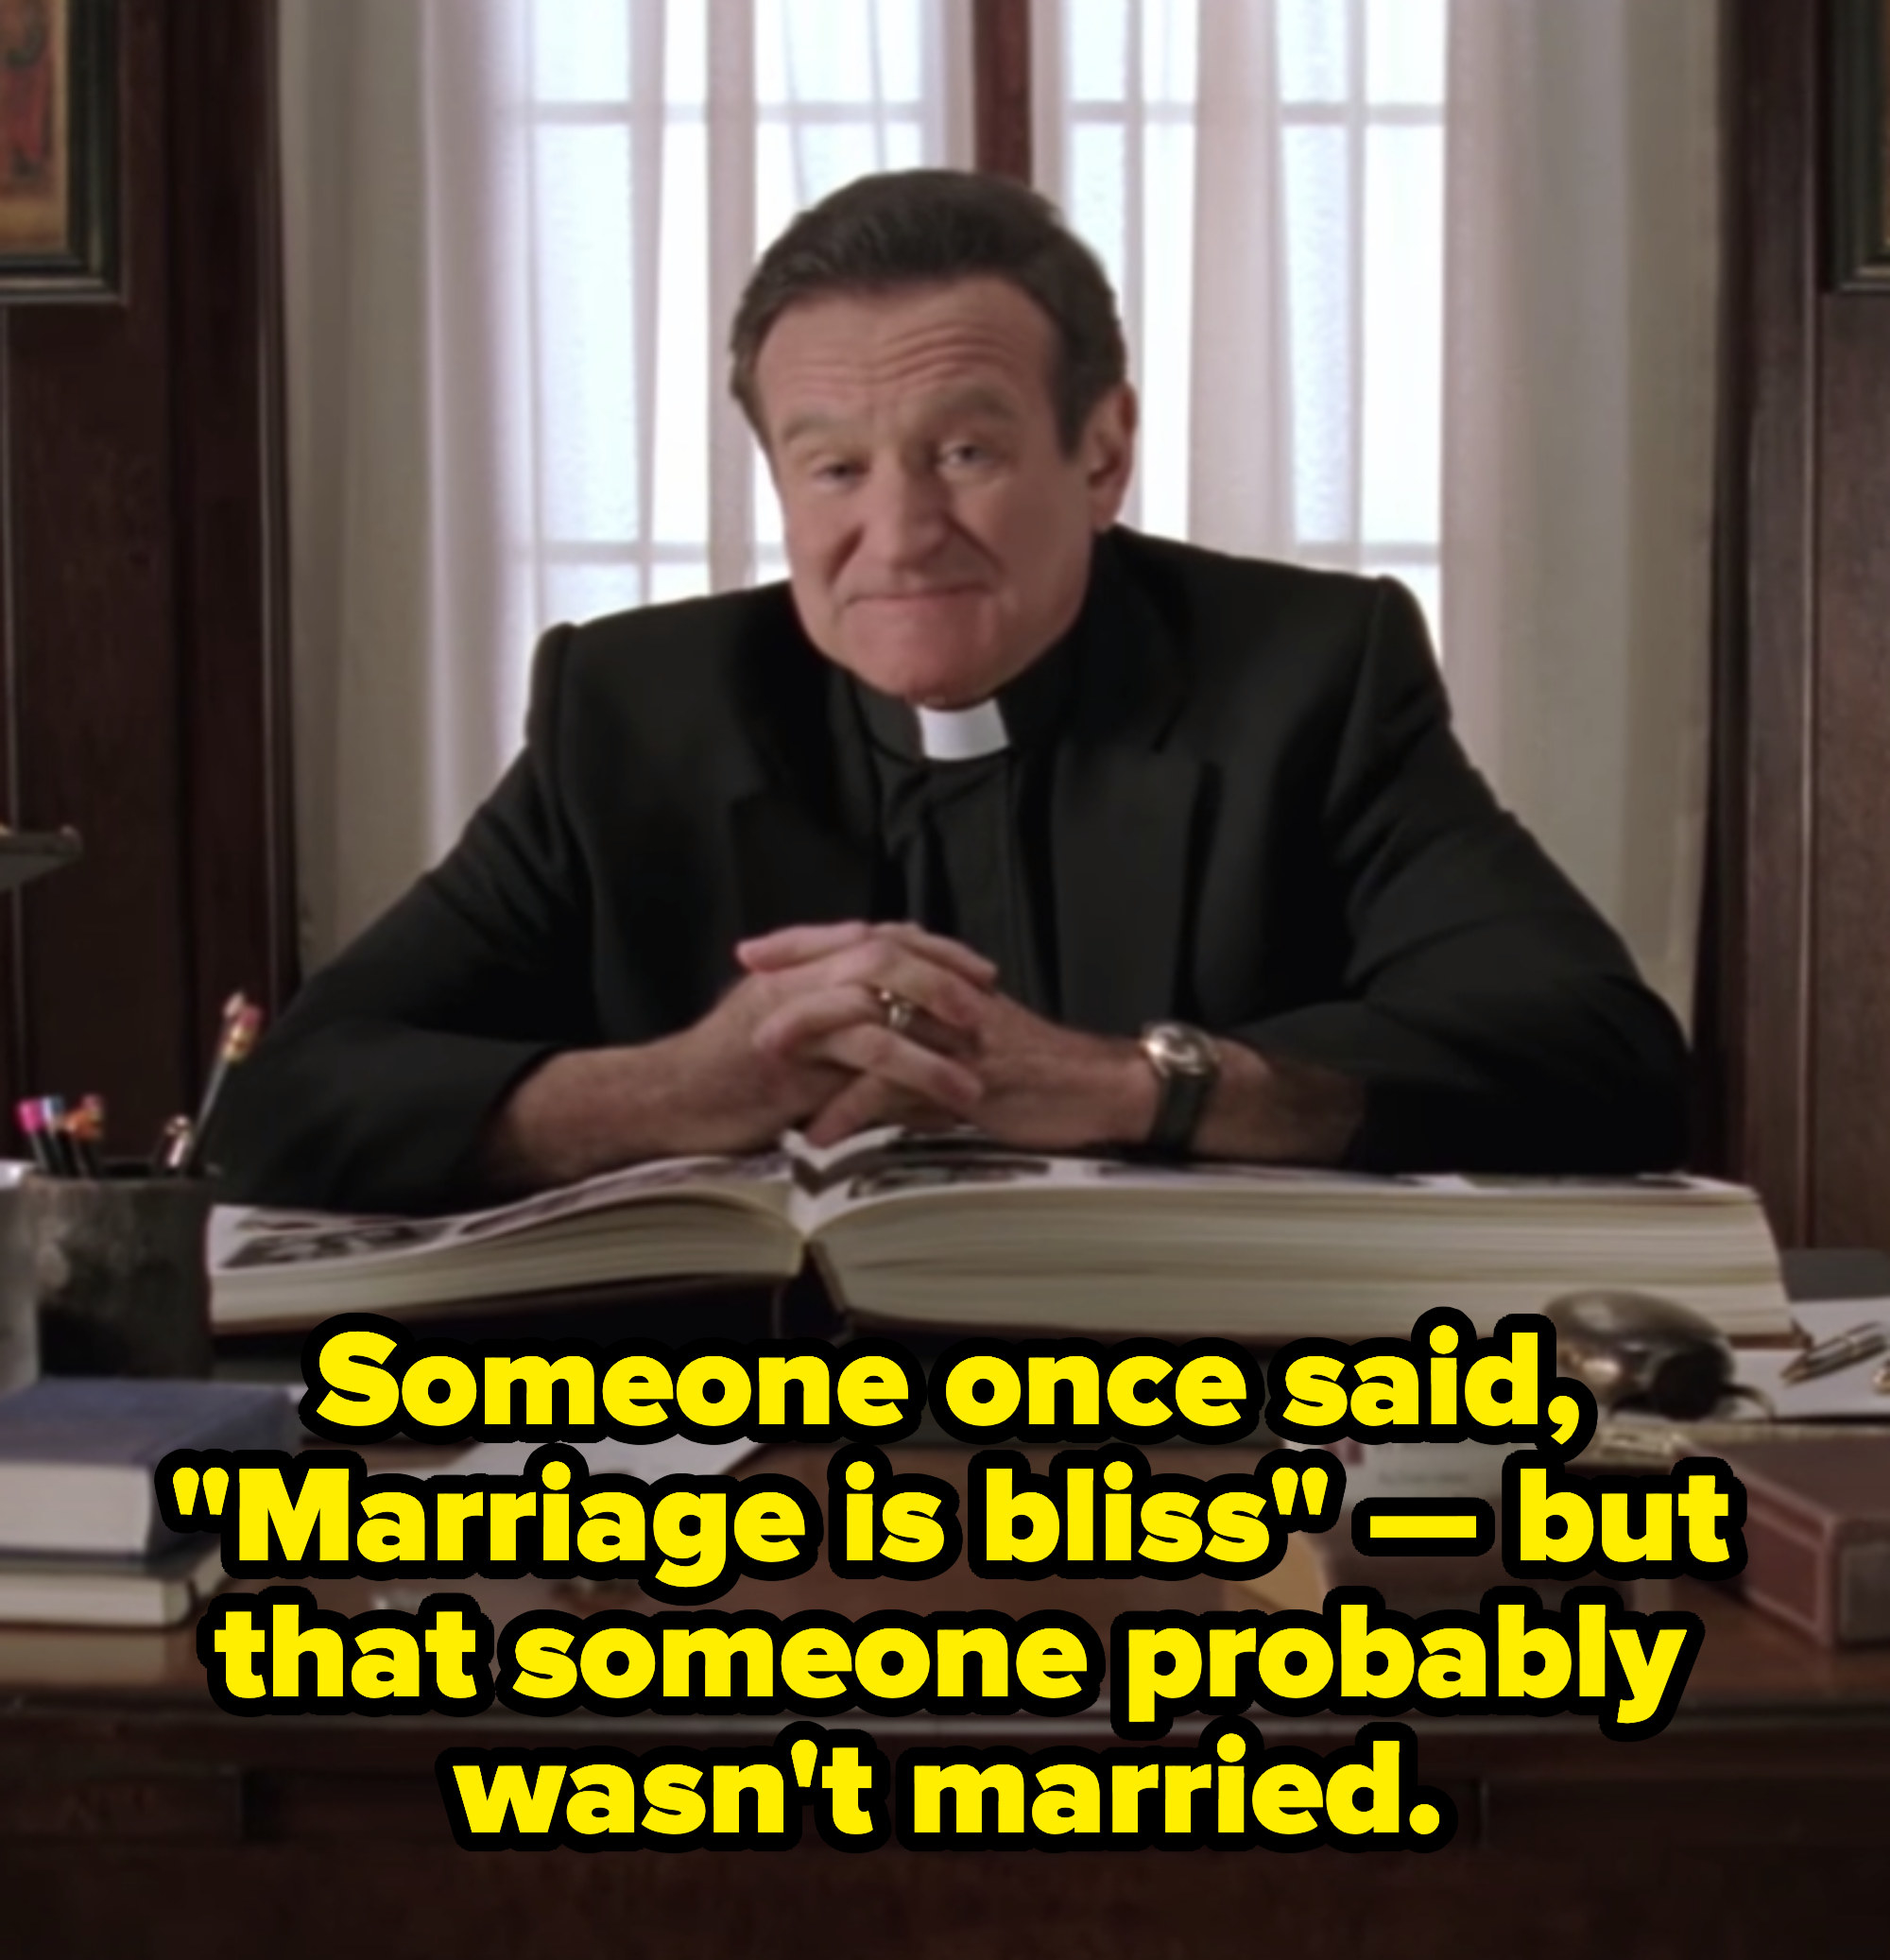 Robin Williams in &quot;License to Wed&quot; saying: &quot;Someone once said, &#x27;Marriage is bliss&#x27; — but that someone probably wasn&#x27;t married.&quot;